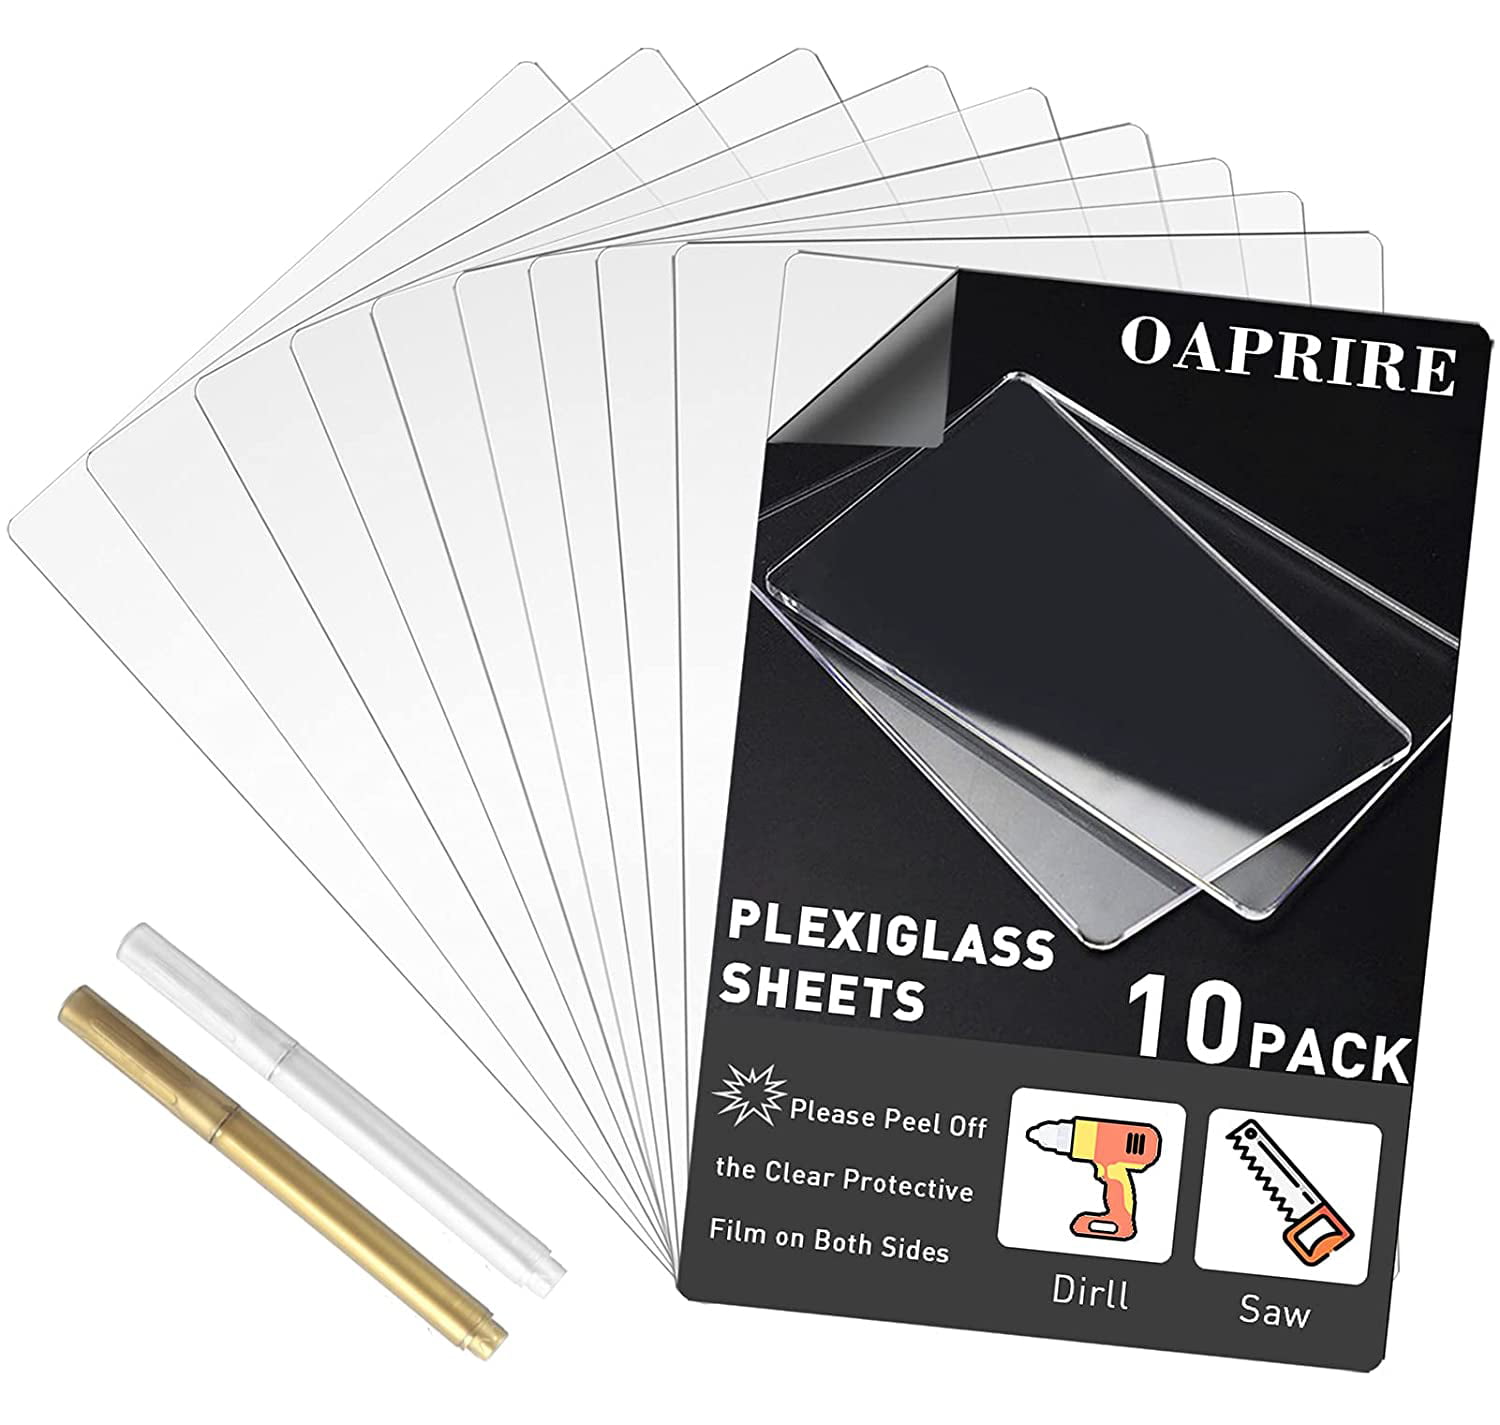 Finydr 8" x 10" Plexiglass Sheet 10 Pieces with Acrylic Markers, Thick 0.04" Acrylic Board with